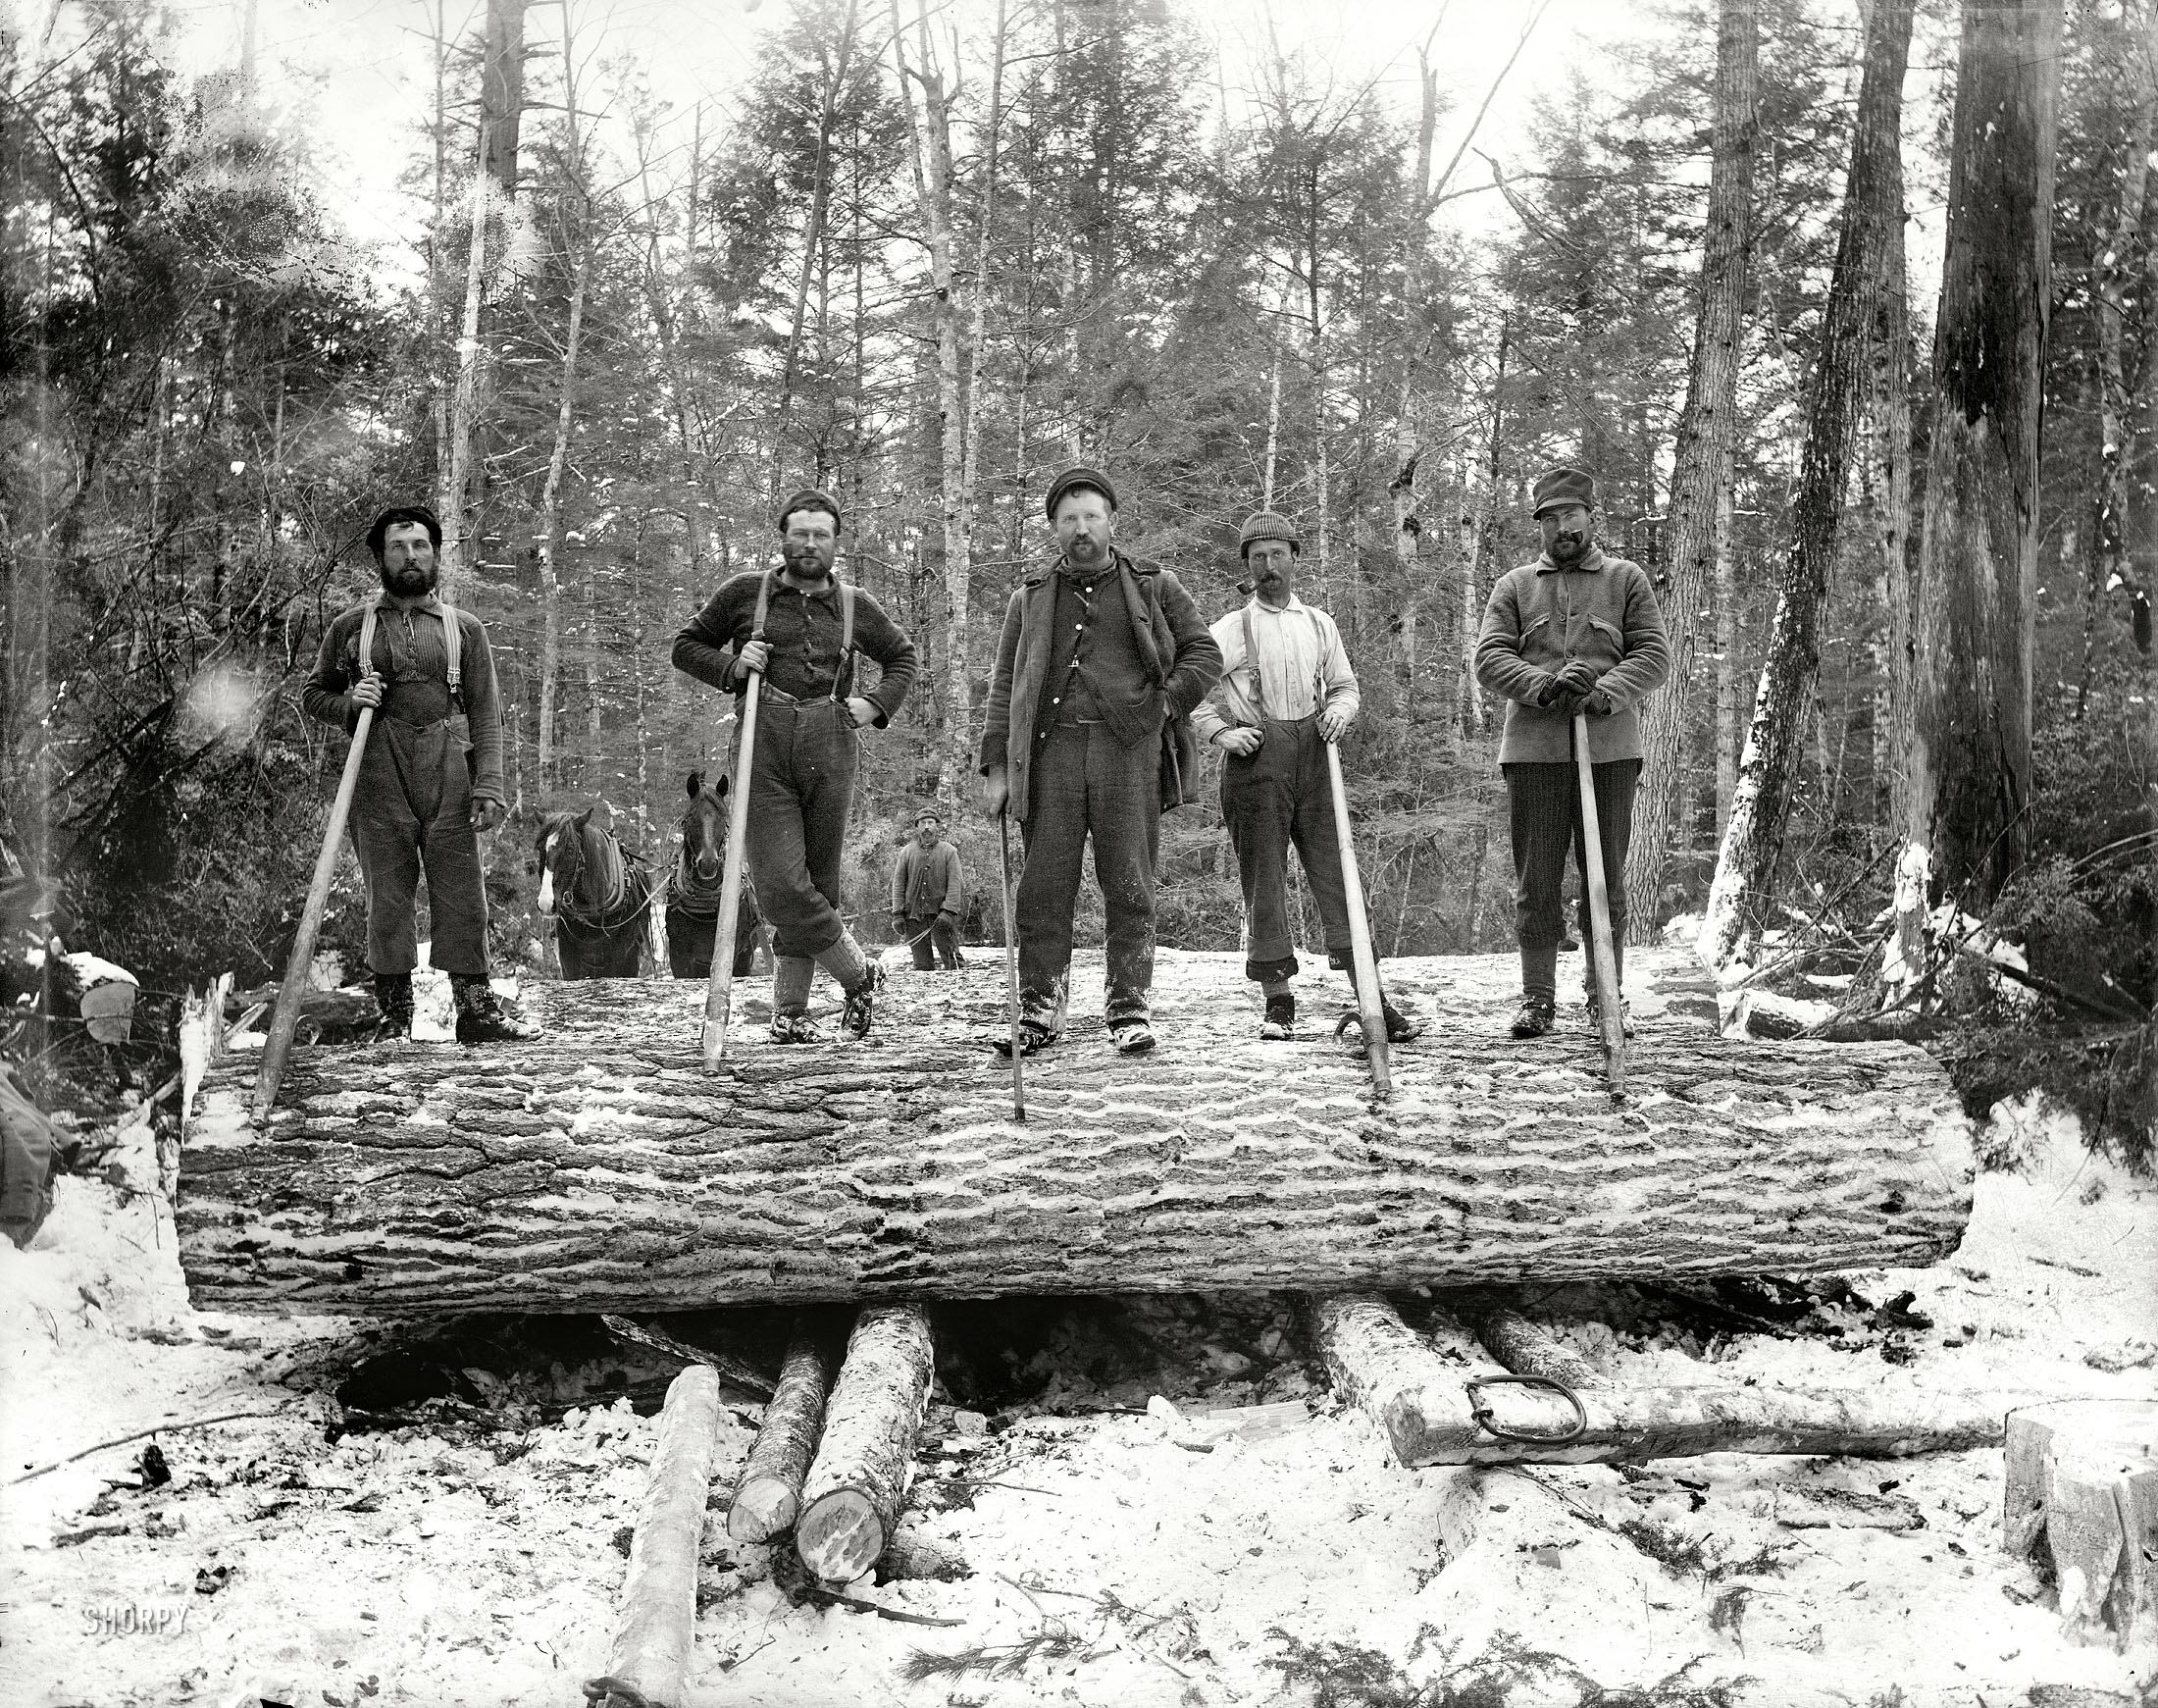 Upper Michigan circa 1899. "The loggers." 8x10 inch dry plate glass negative, Detroit Publishing Company. View full size.